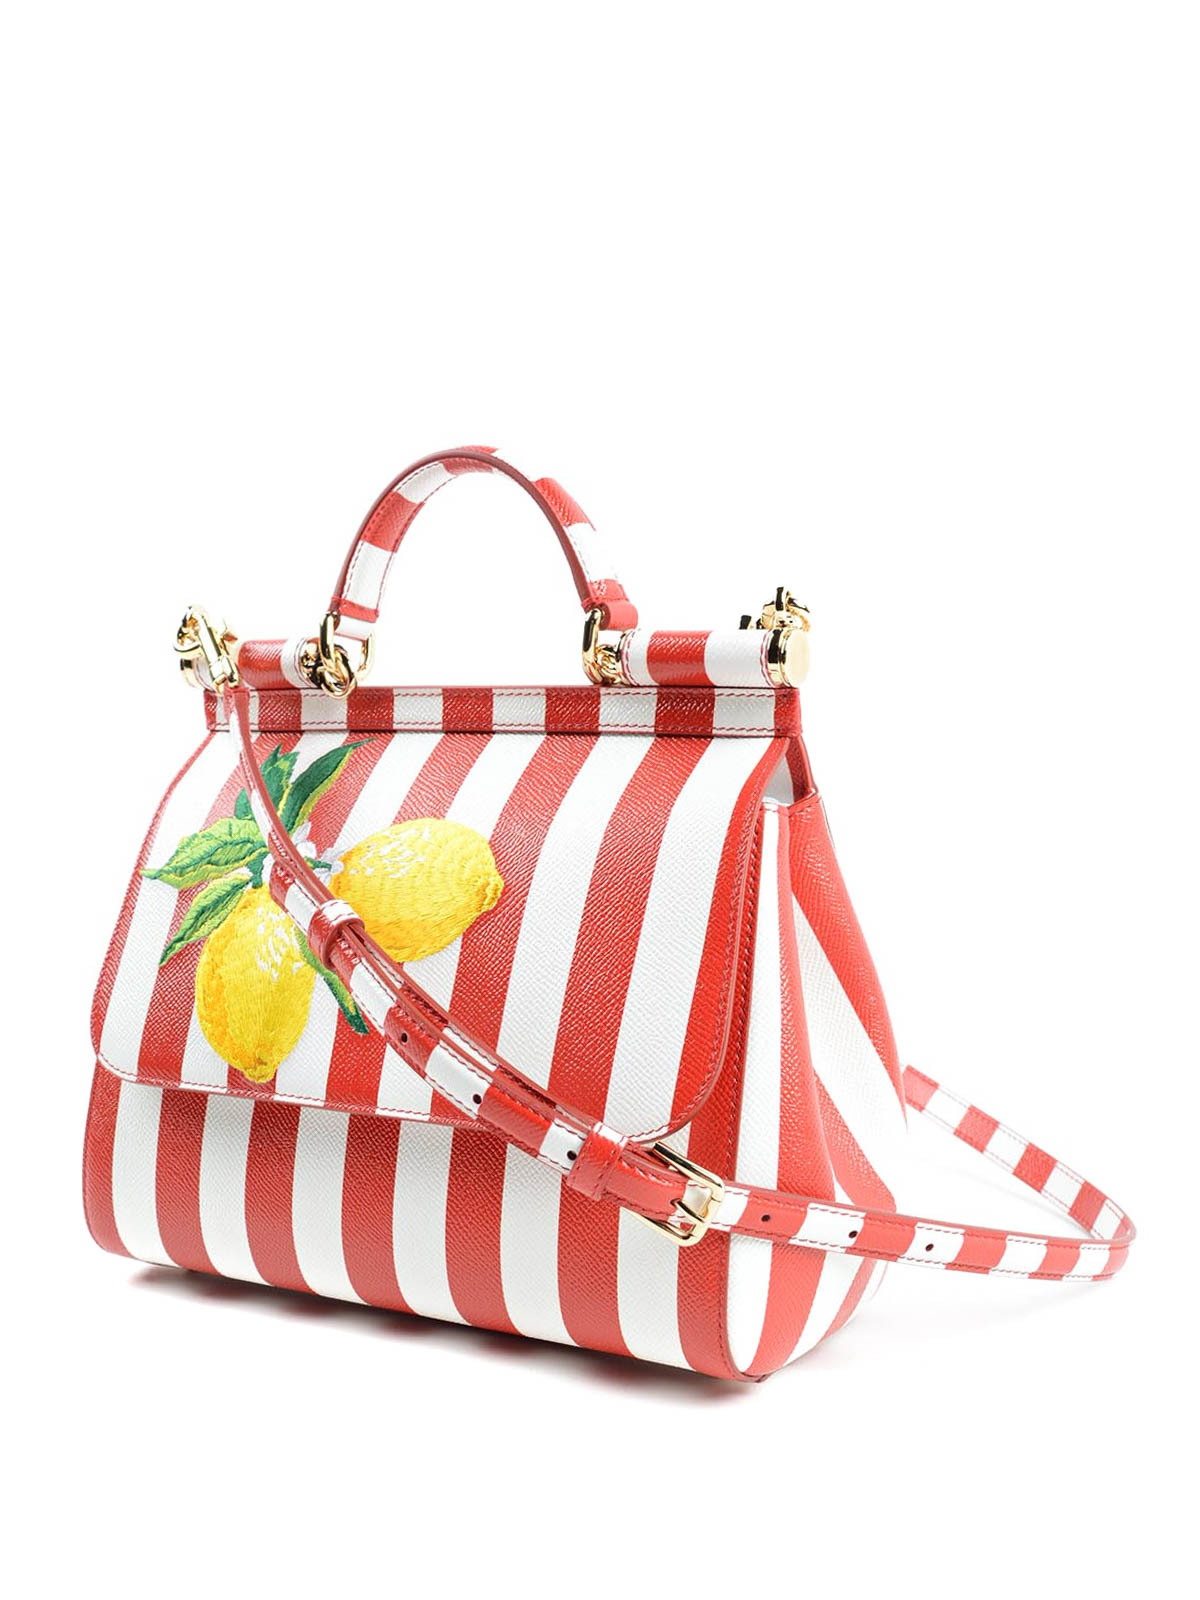 Totes bags Dolce & Gabbana - Sicily striped leather bag - BB6002AC6238Q305